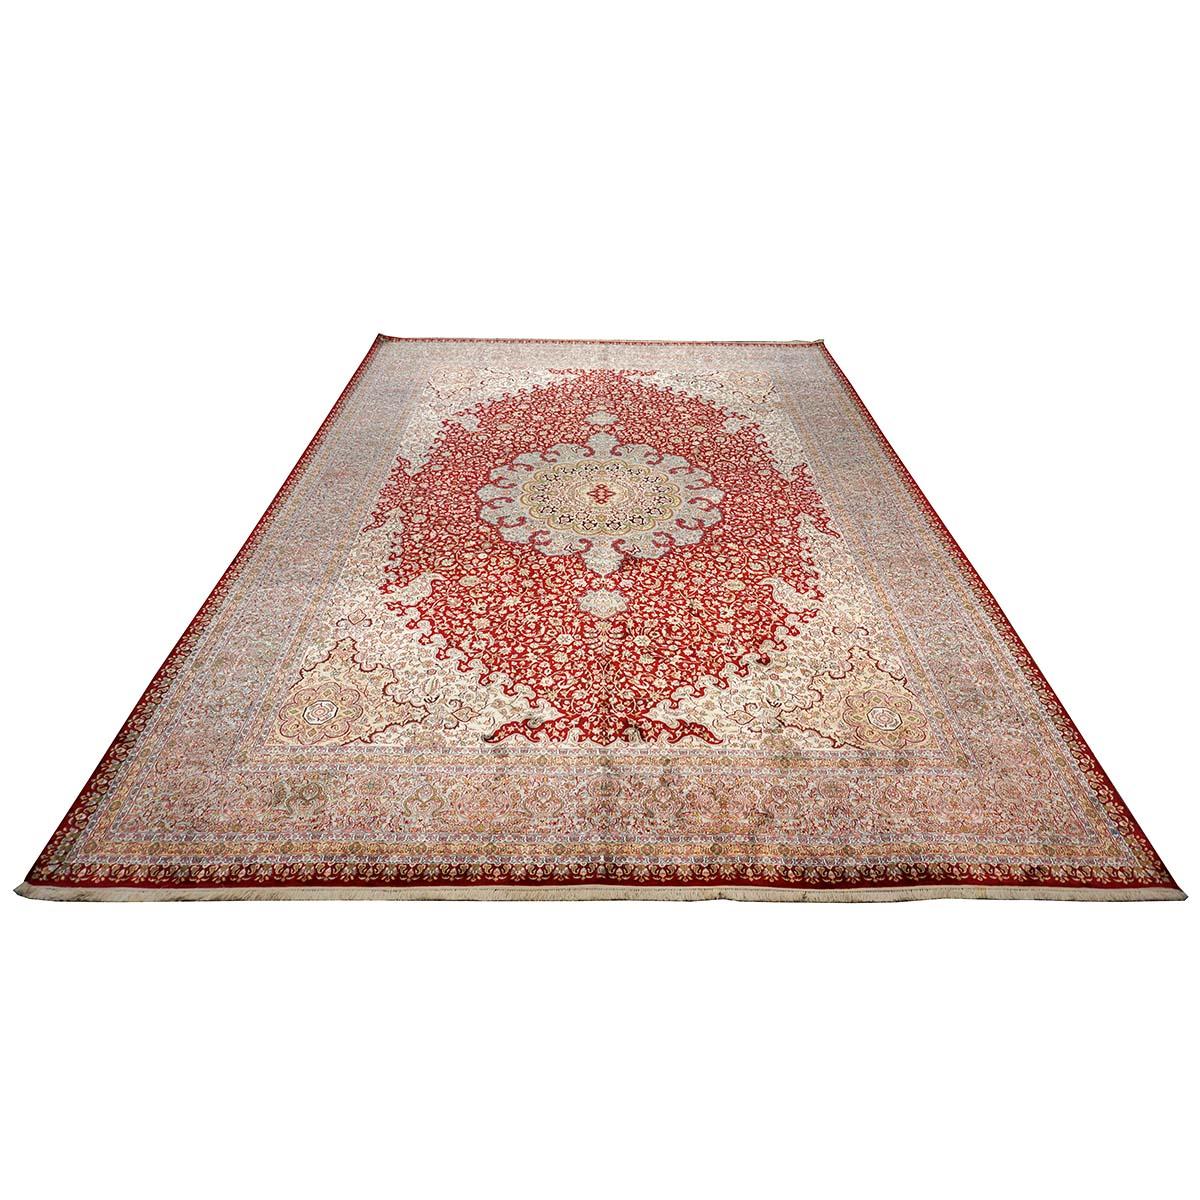 Ashly Fine Rugs presents a 1980s Vintage Kasmiri All-Silk handmade rug. The origin of carpet weaving in Kashmir can be traced back to the 15th century when Sultan Zainul Abidin (popularly known as Budshah) brought some Persian craftsmen to the